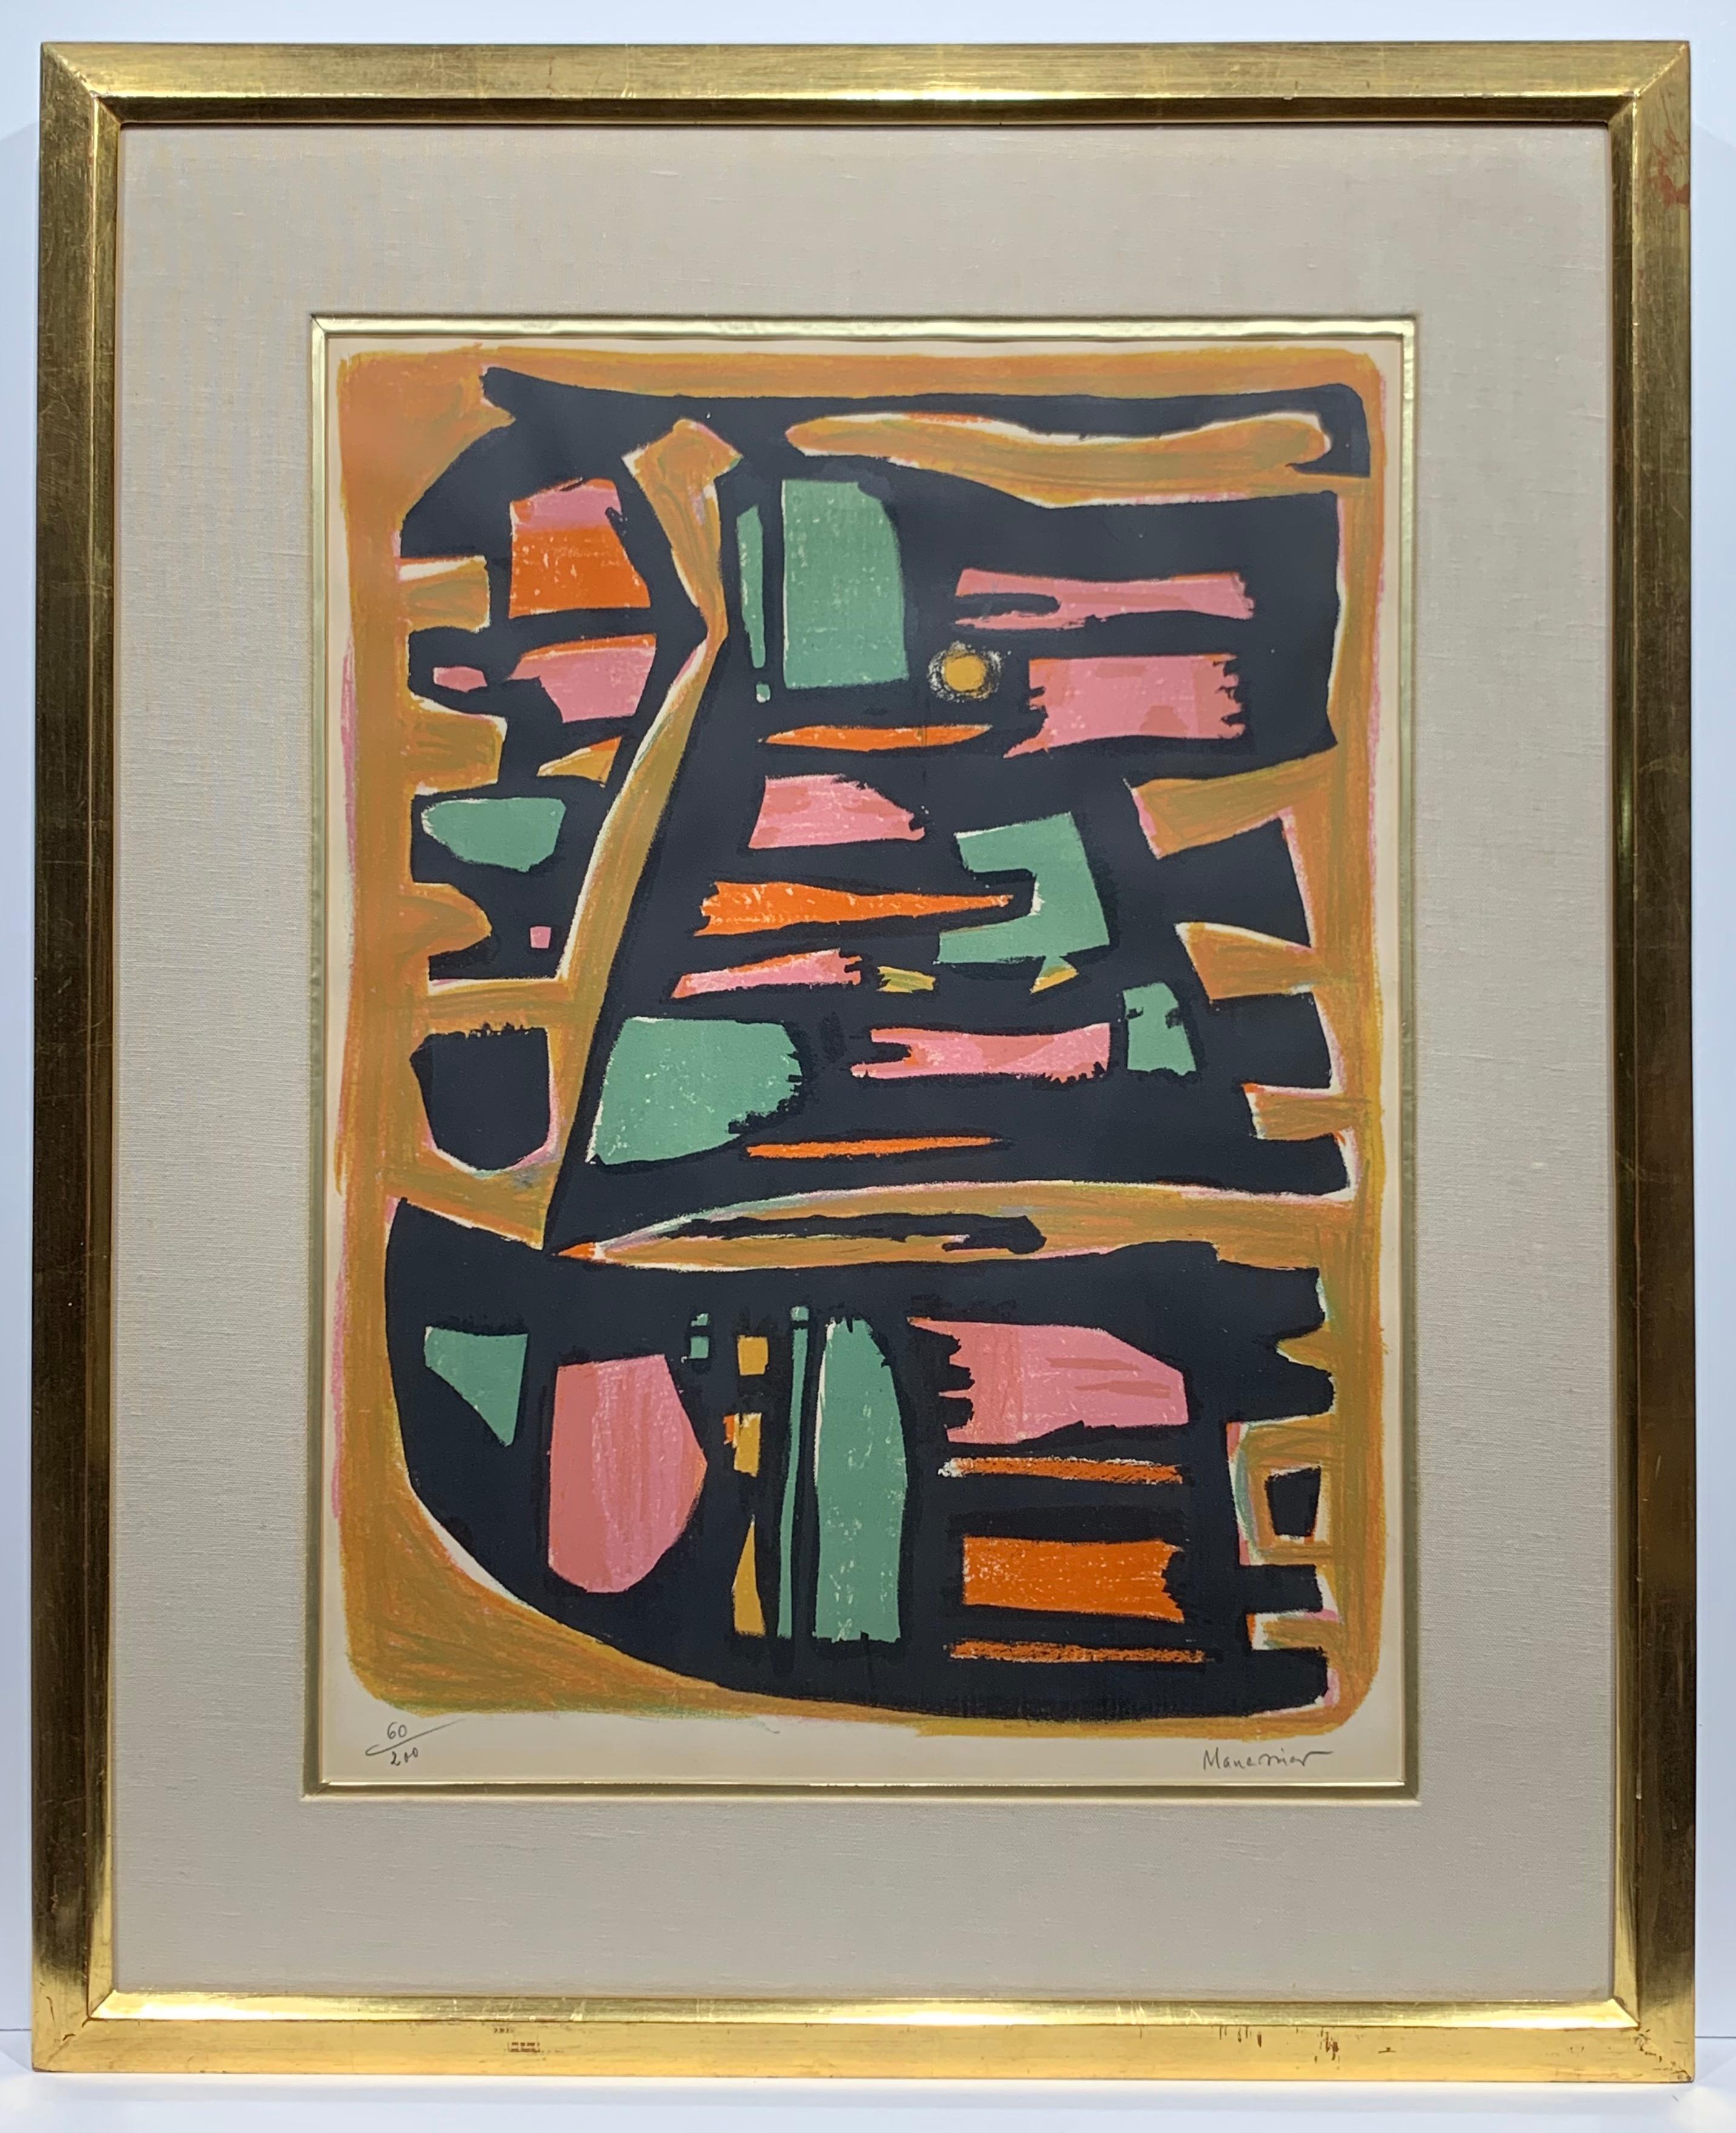 Alfred MANESSIER Abstract Print - Automne (abstract expressionist composition)